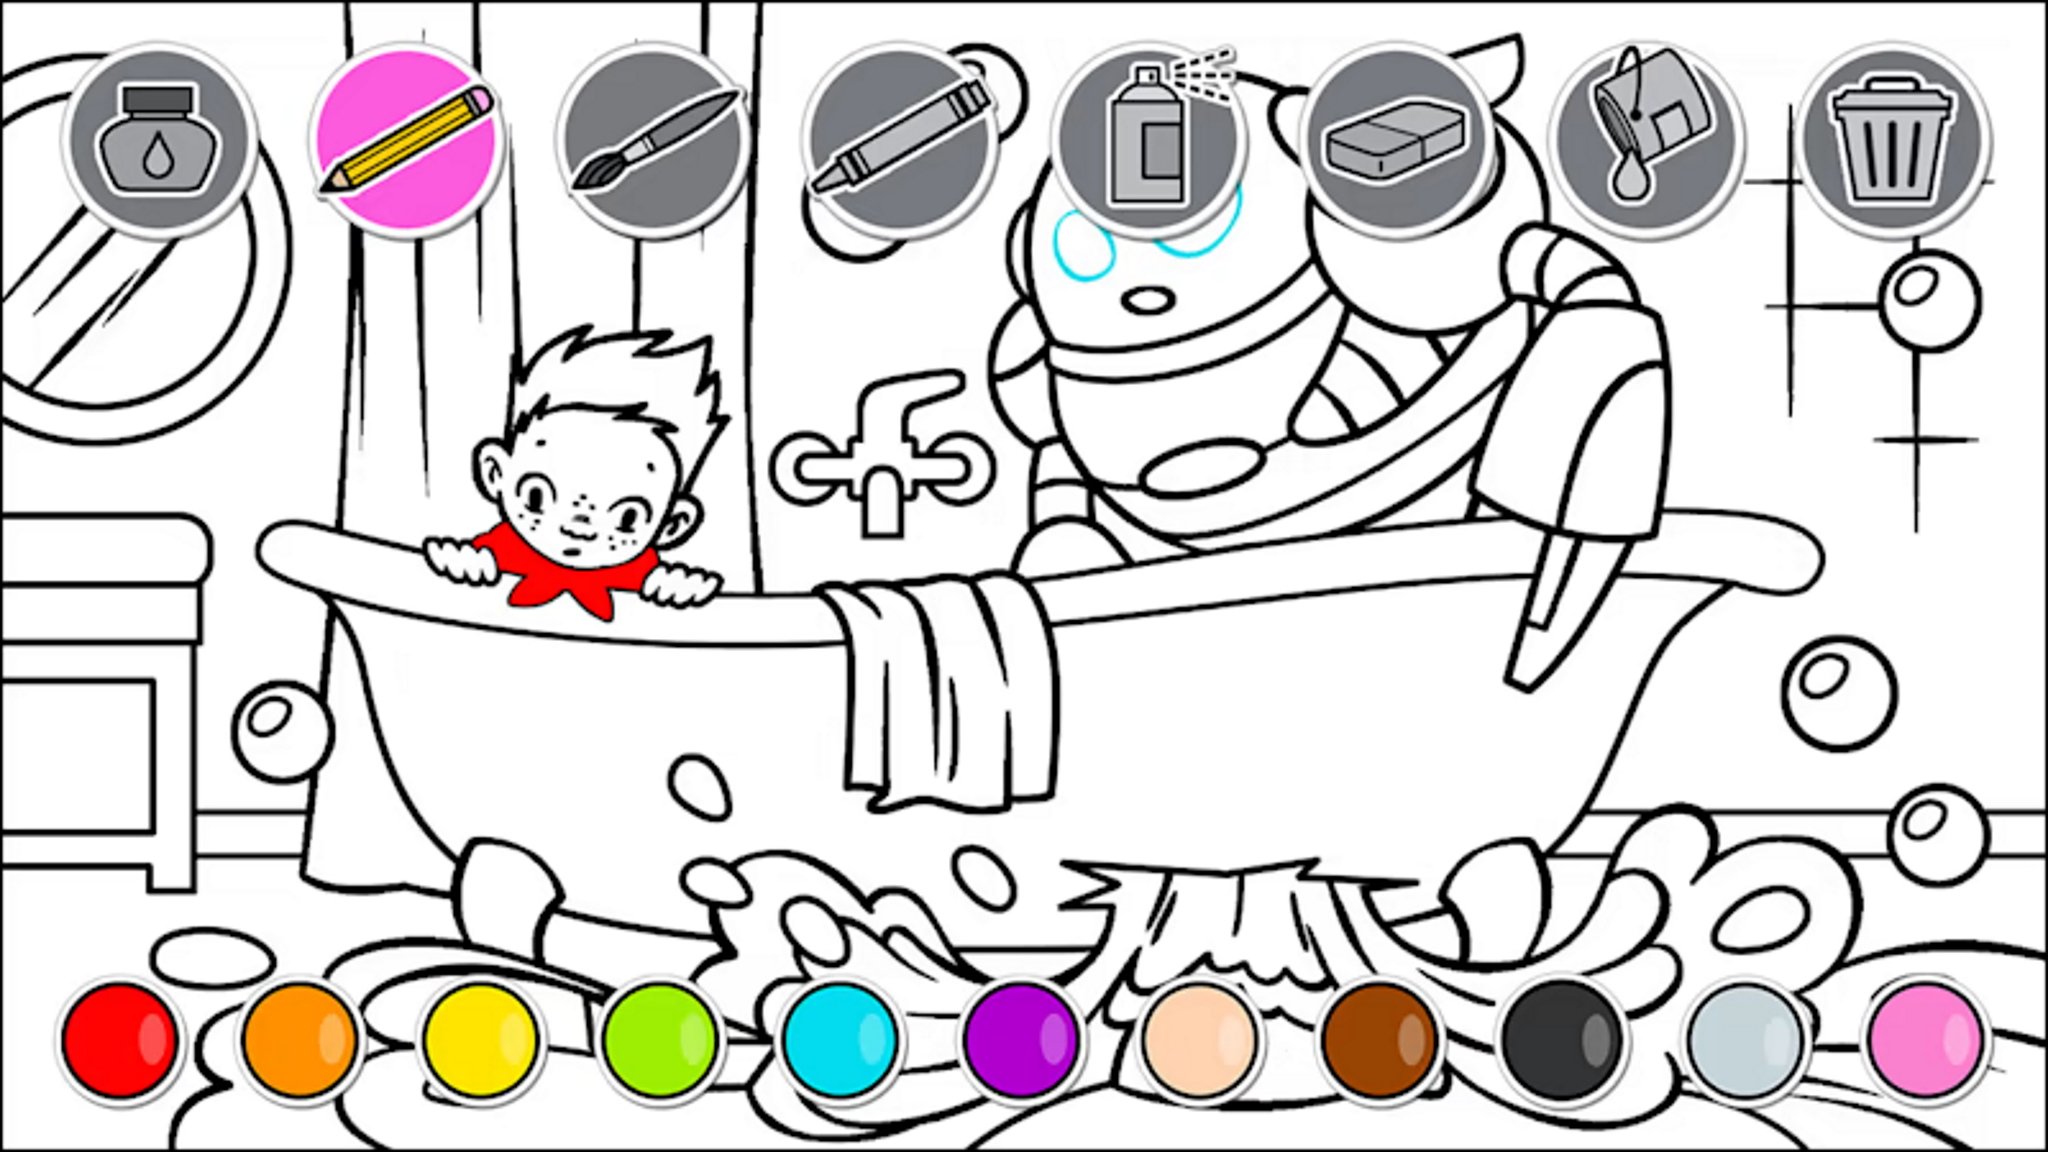 Comic coloring book coloring page switch